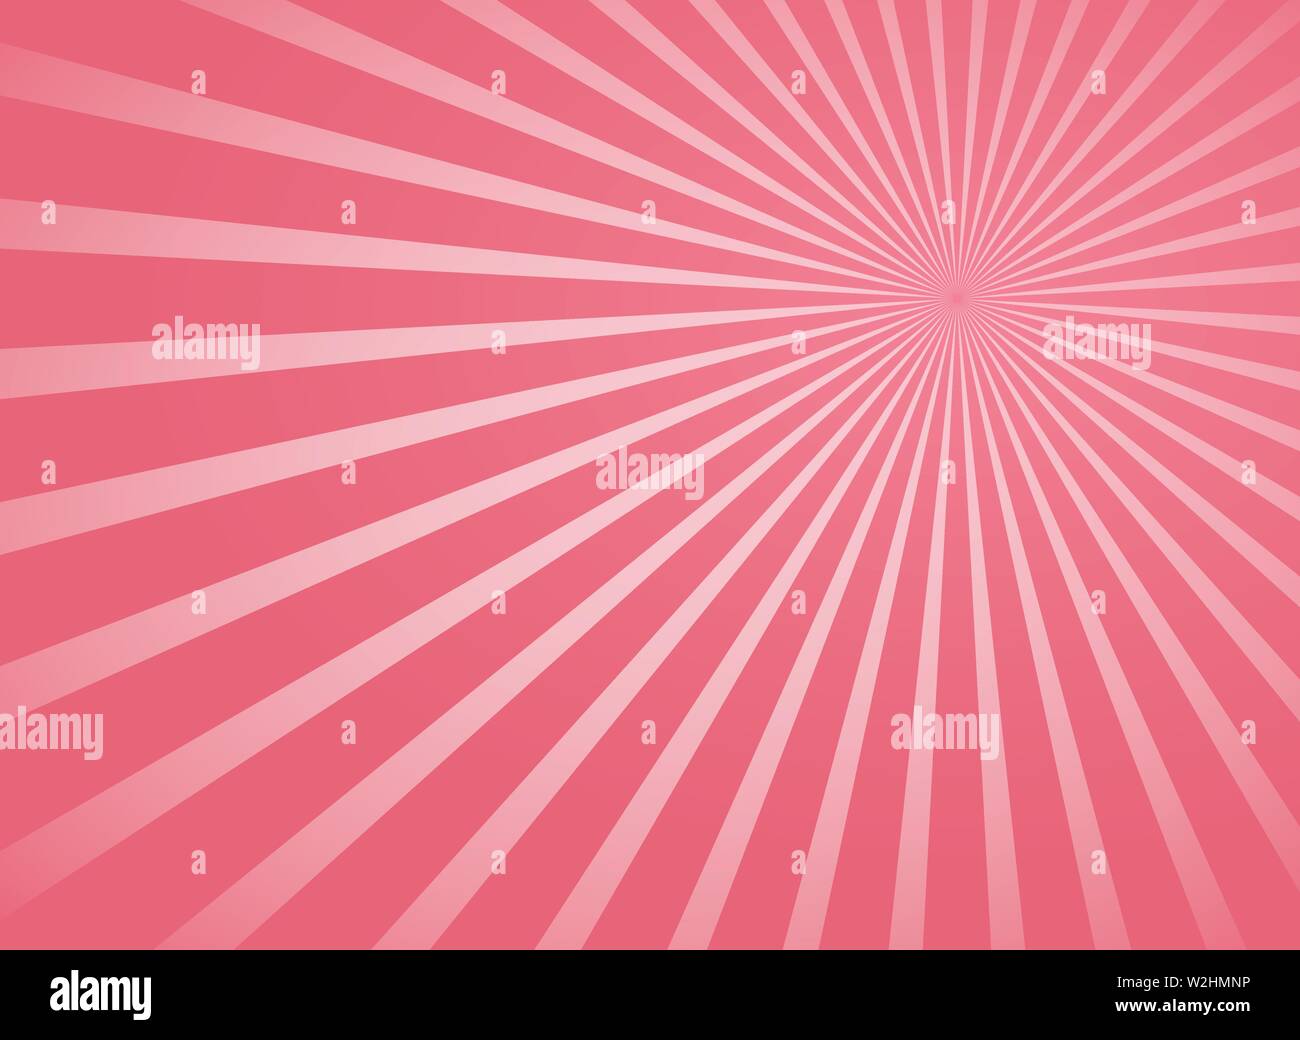 Pink beams and rays abstract vector illustration radial lines background Stock Vector